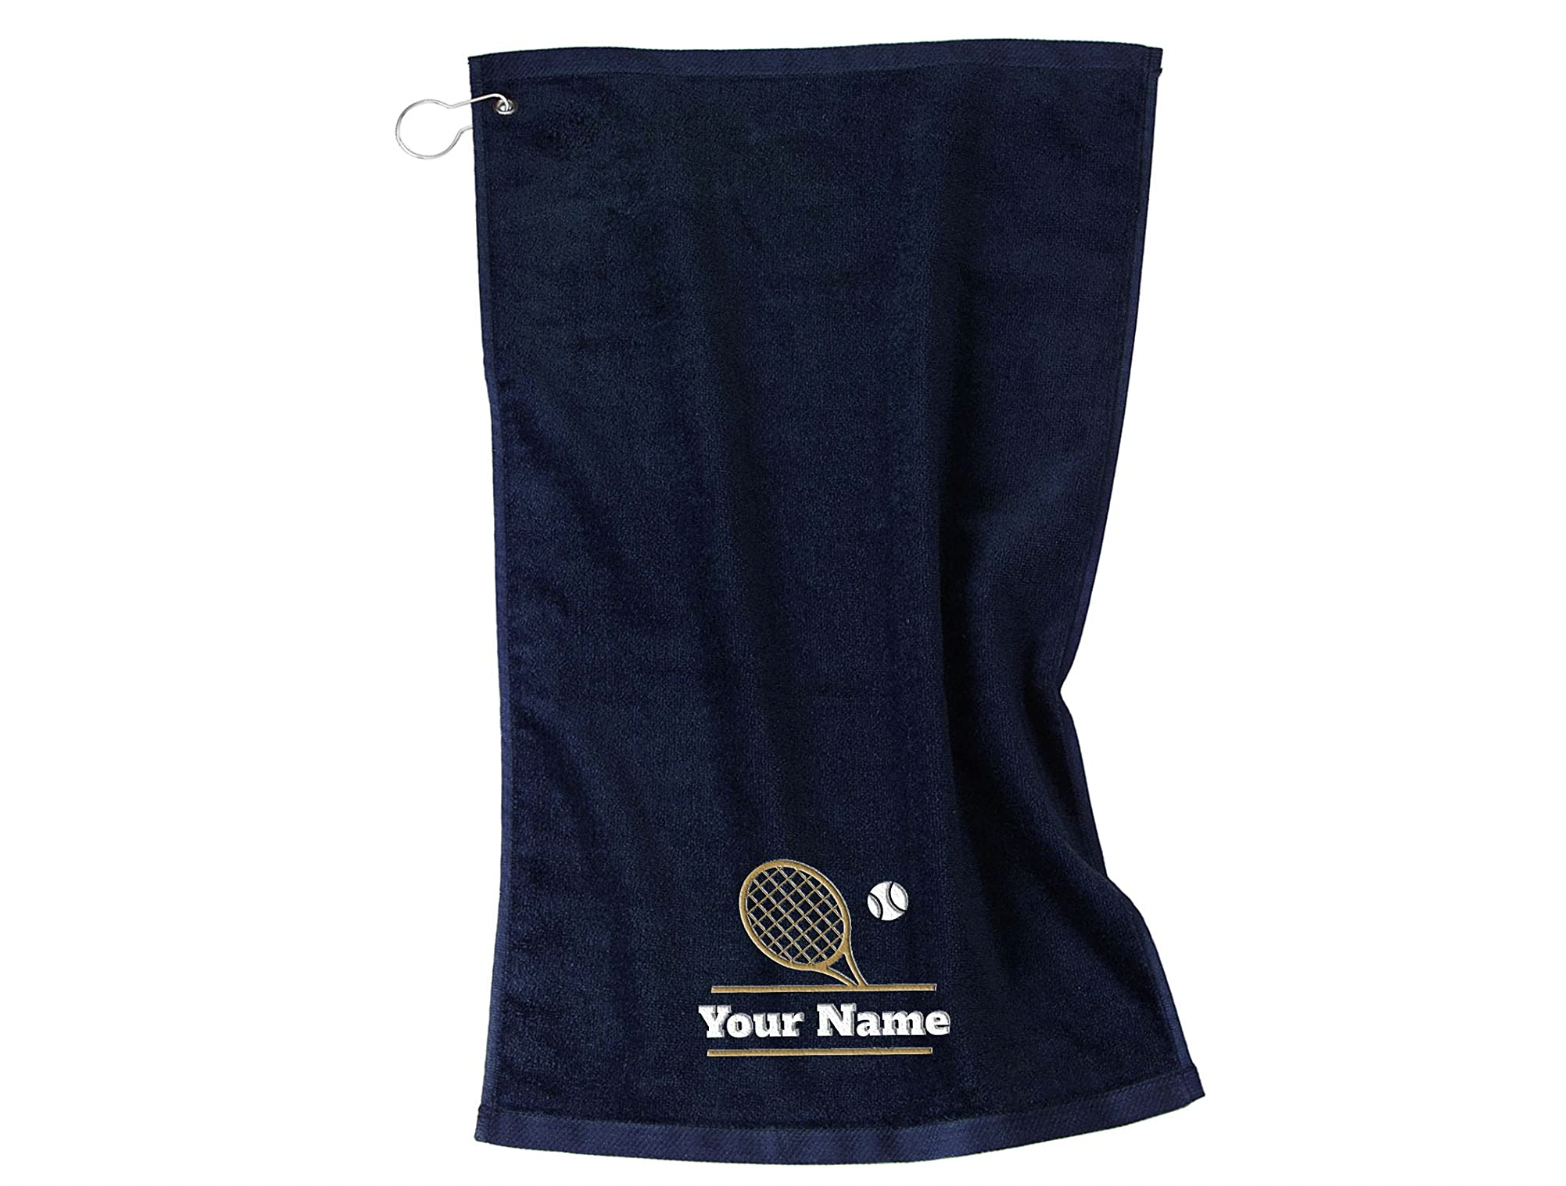 tennis-gifts-towels